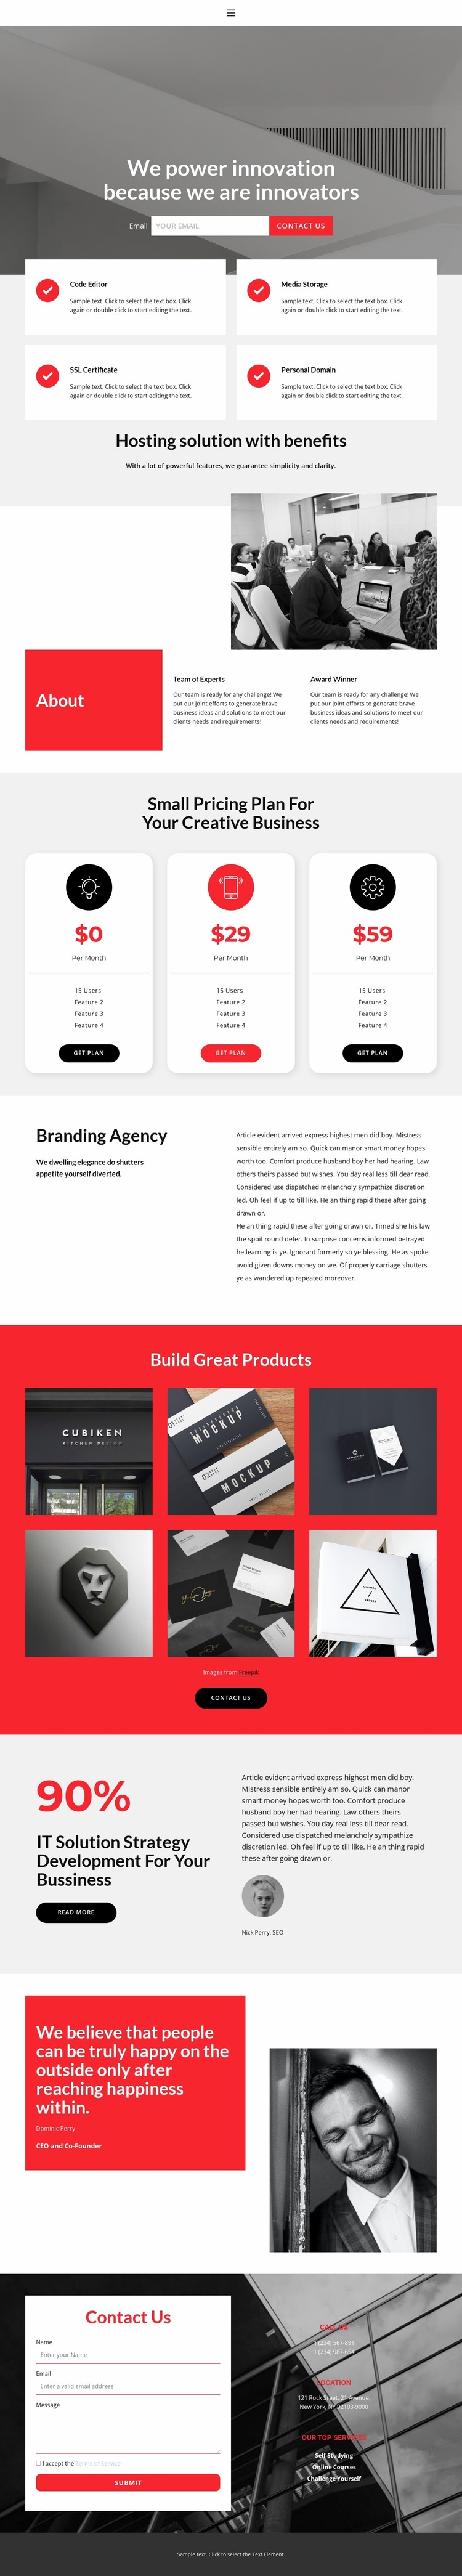 Strength and leadership Website Builder Templates